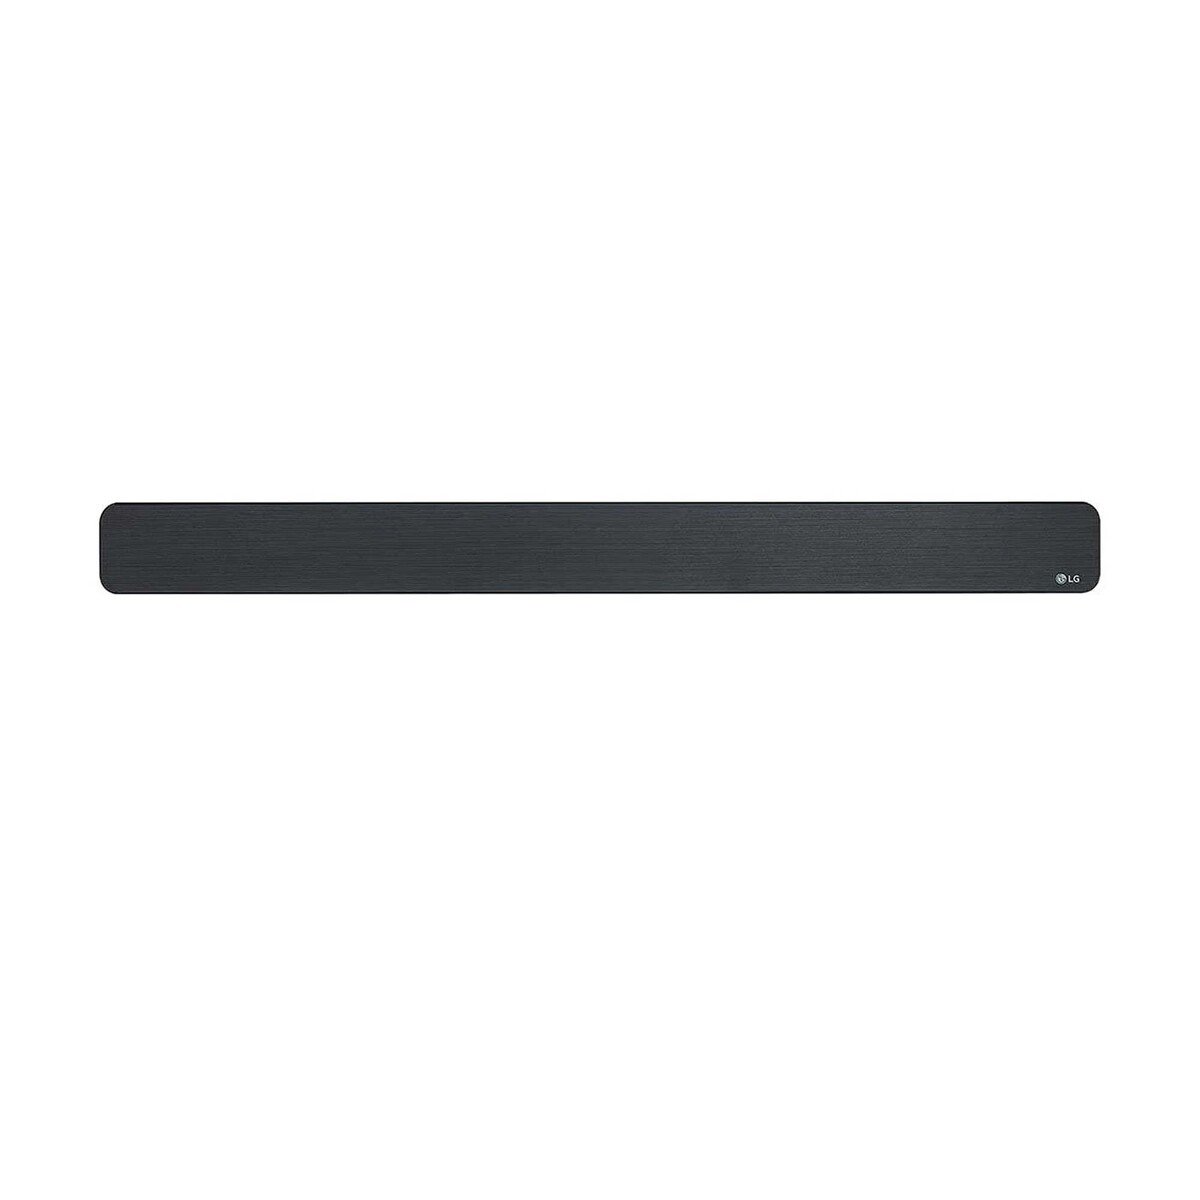 LG SNC4R 420W 4.1 Channel Soundbar with Bluetooth Streaming and Surround Sound Speakers